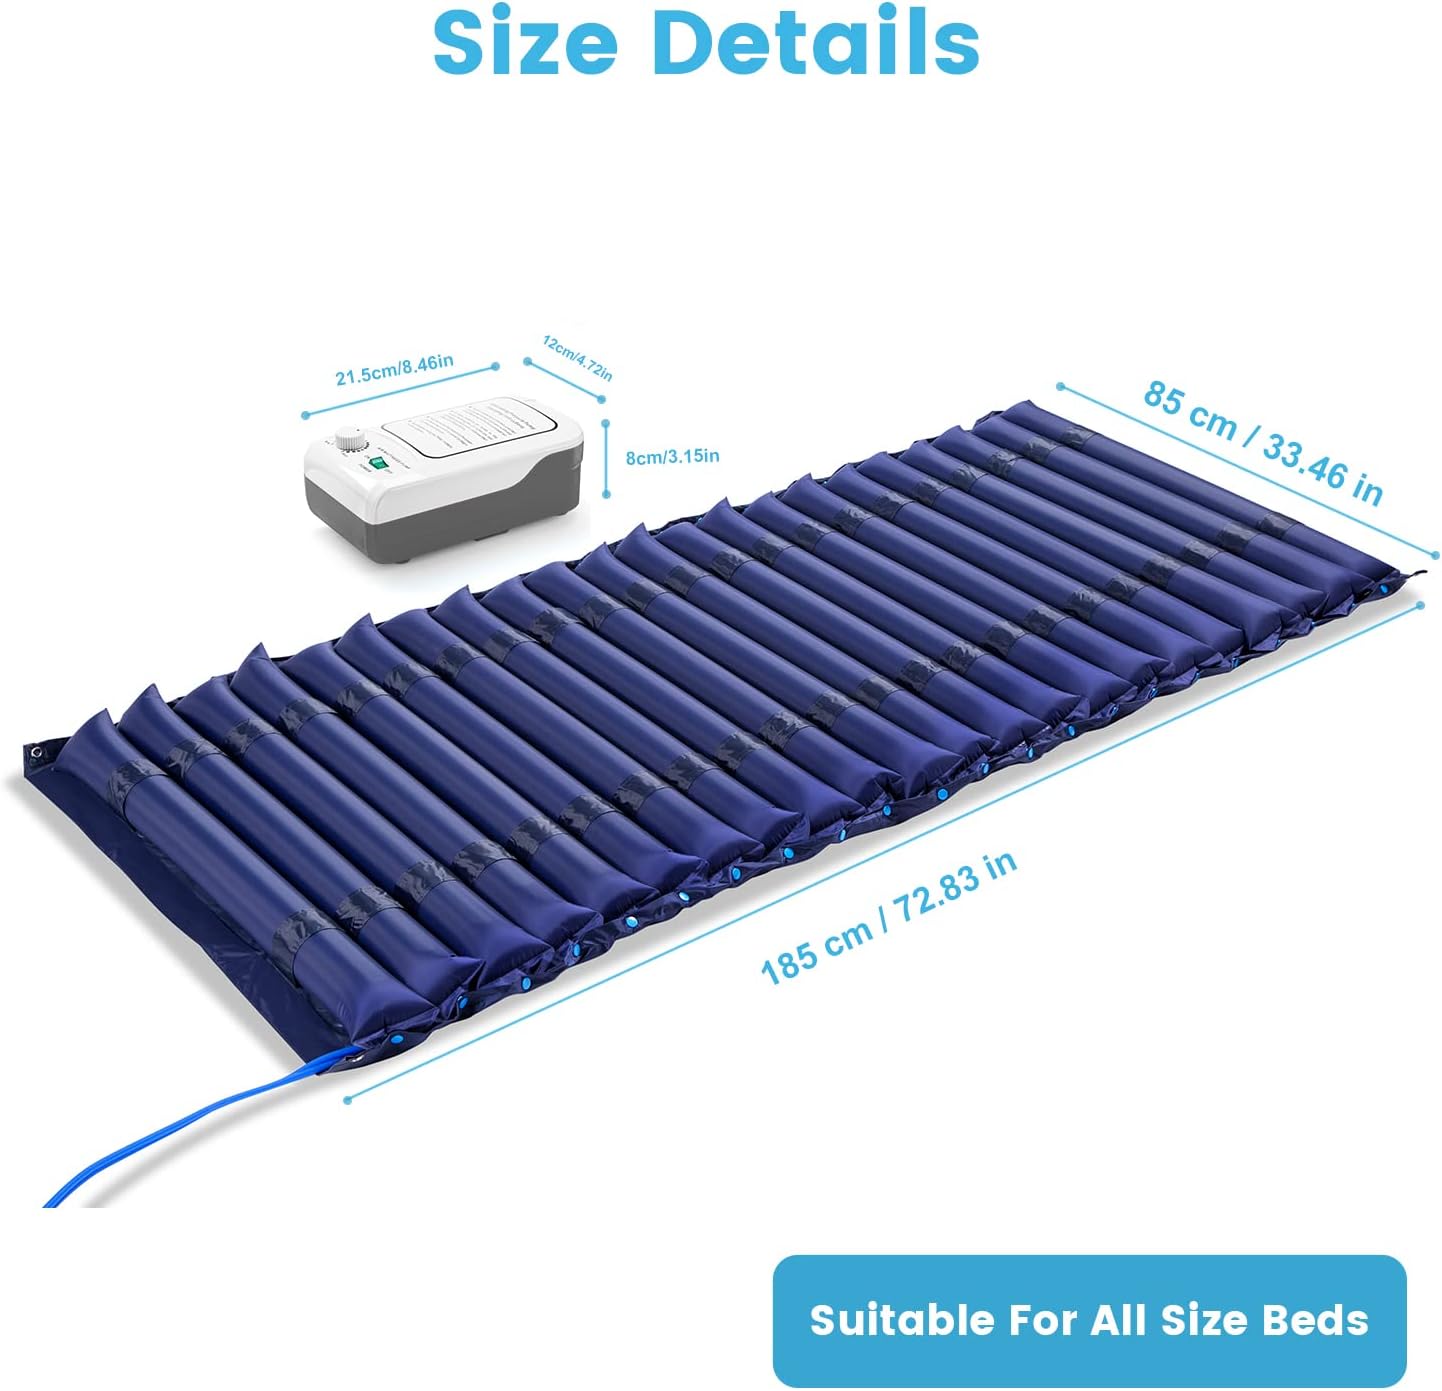 HITHINKMED Alternating Air Pressure Mattress with CPR Type, Low Air Loss Mattress Includes Ultra Quiet Pump,Hospital Bed Air Mattress Pressure Pads for Bed Sores Ulcer, Active Air Extraction Mattress